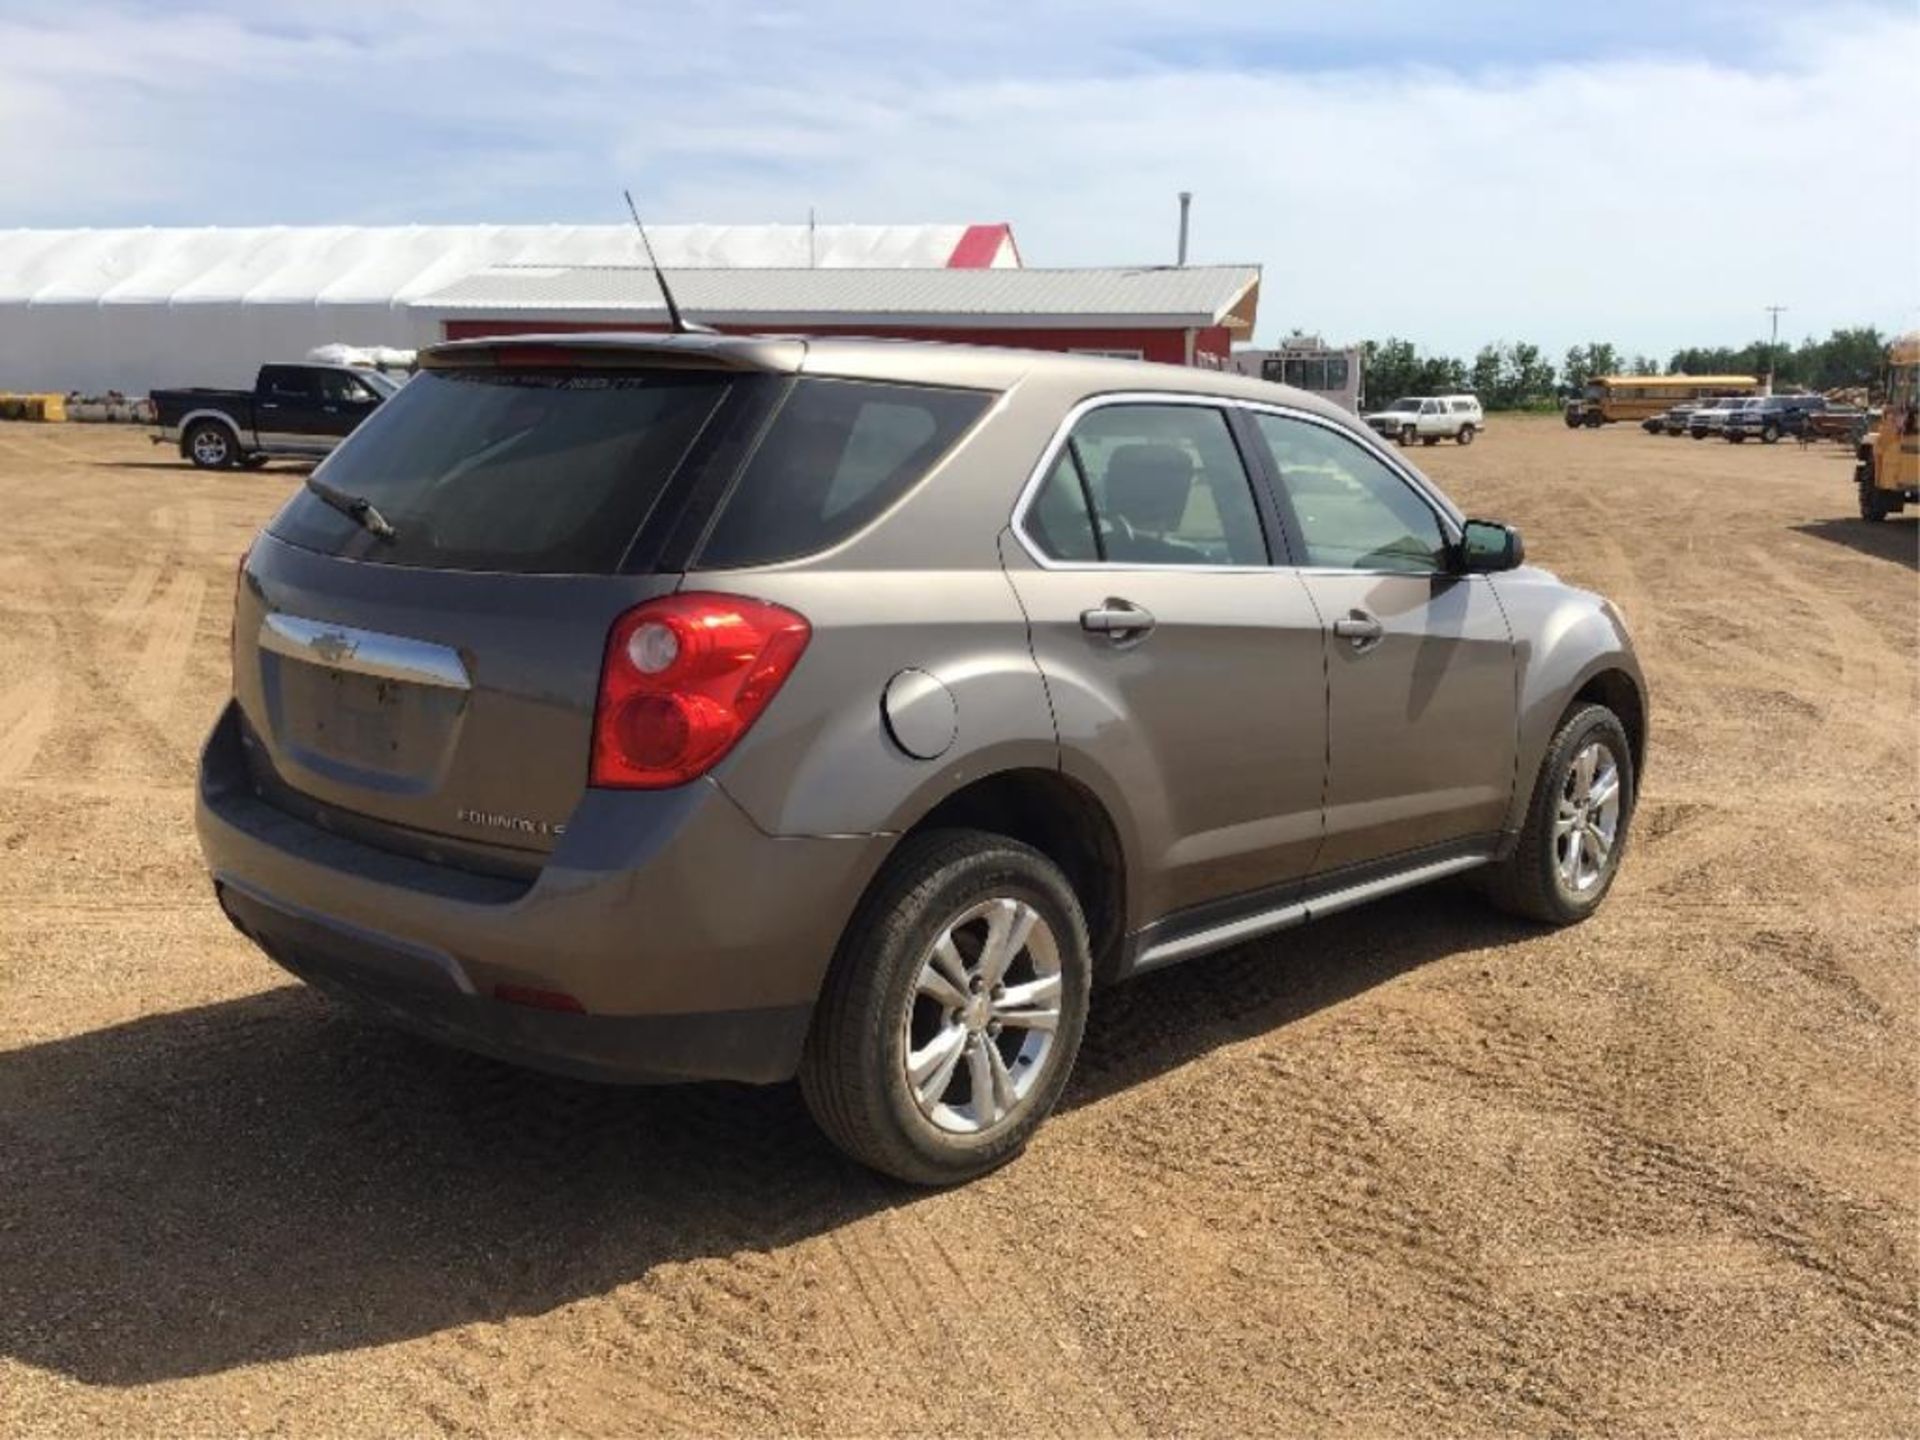 2010 Chevrolet Equinox LS AWD SUV VIN 2CNFLCEW3A6390547 EcoTec Eng, A/T, 105,936km. From the Fort - Image 4 of 10